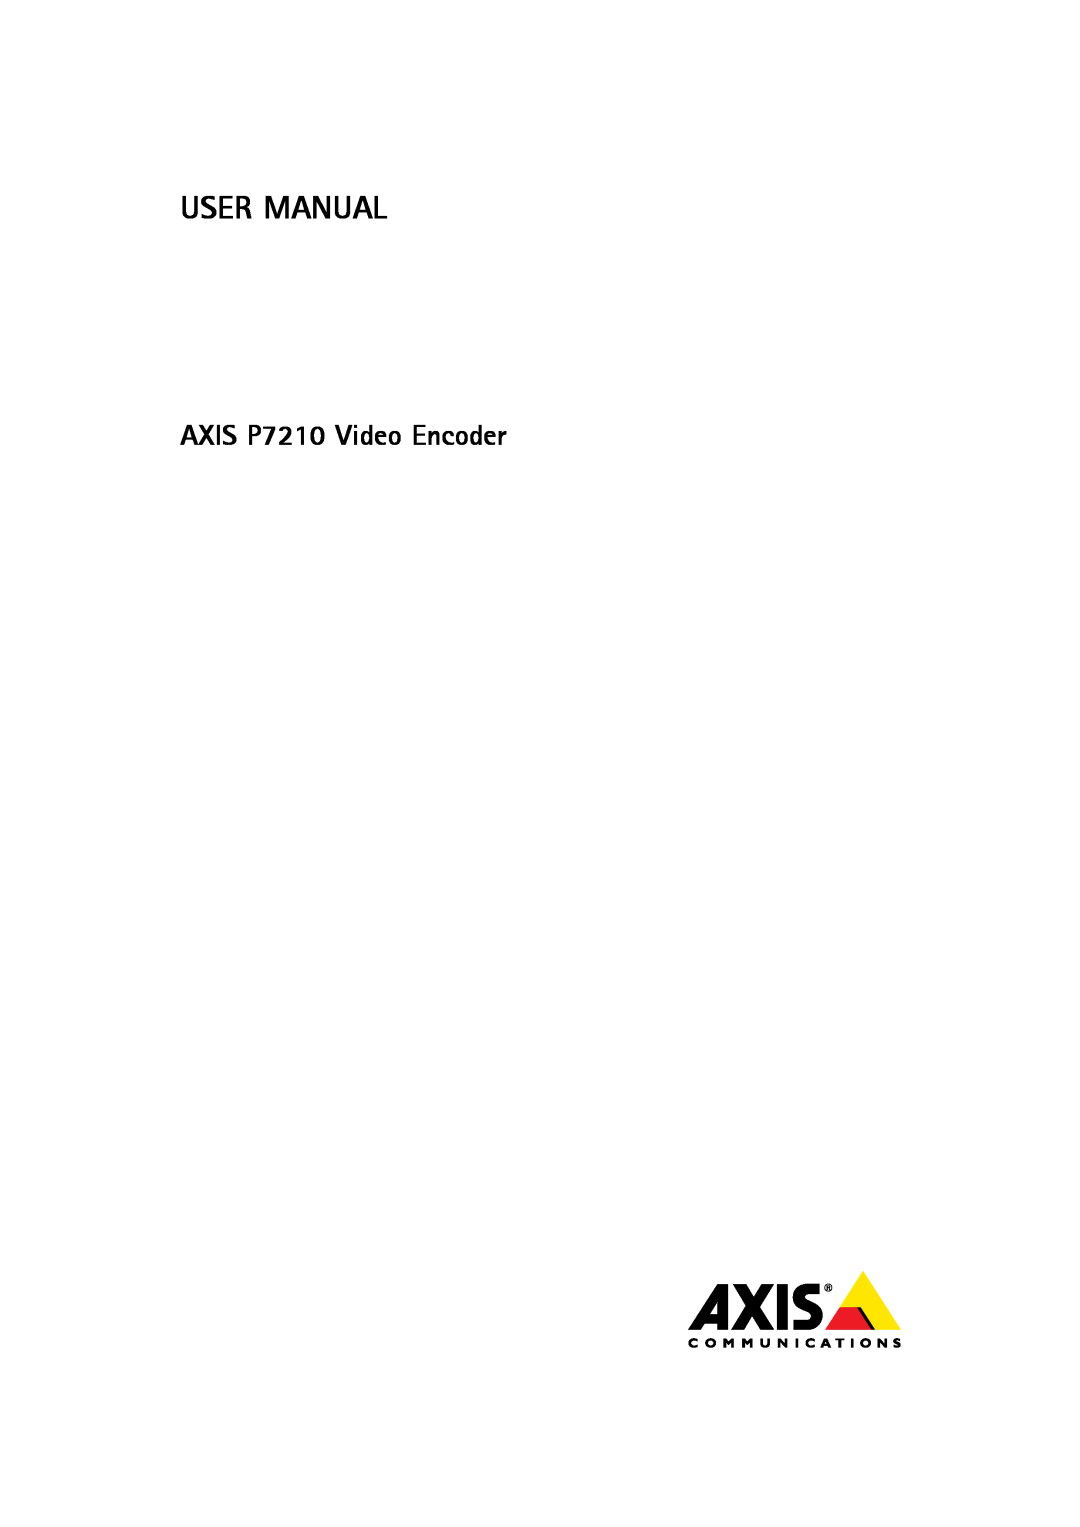 Axis Communications user manual AXIS P7210 Video Encoder 